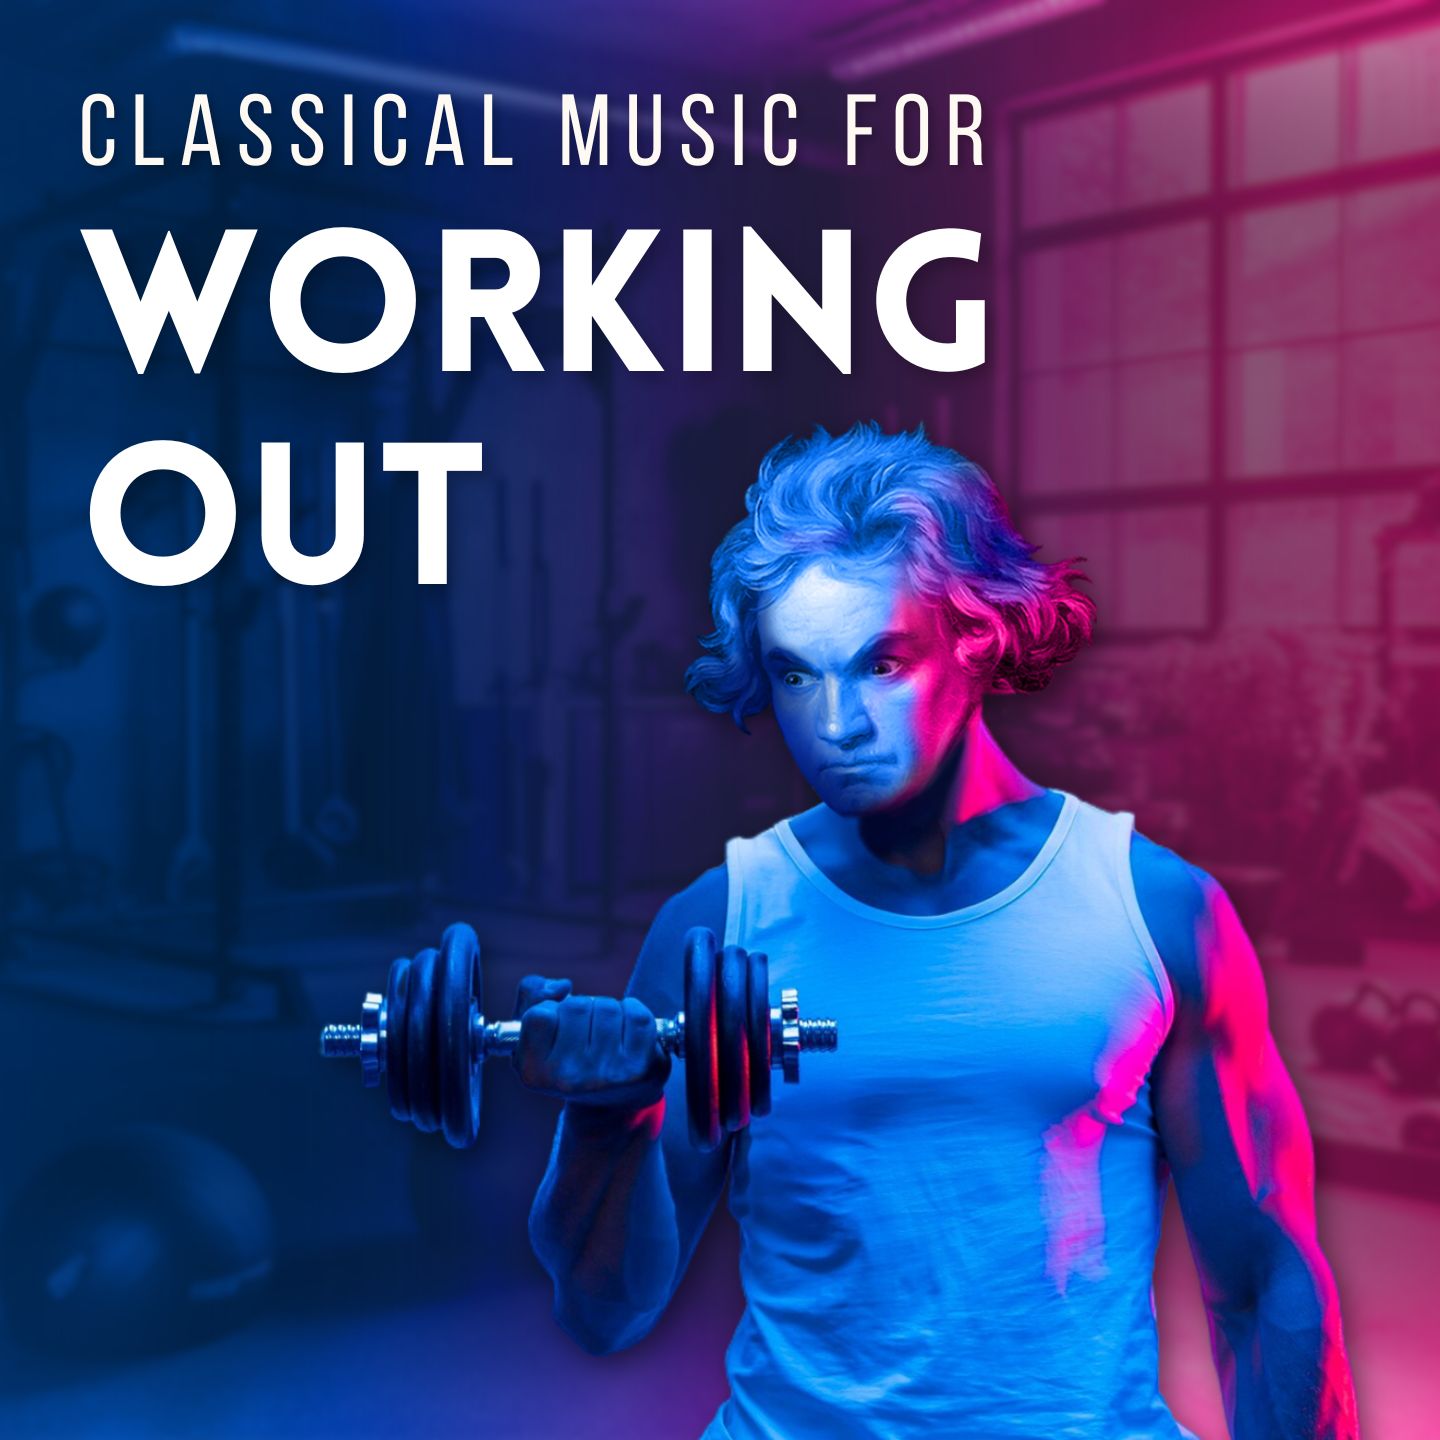 Classical Music for Working Out